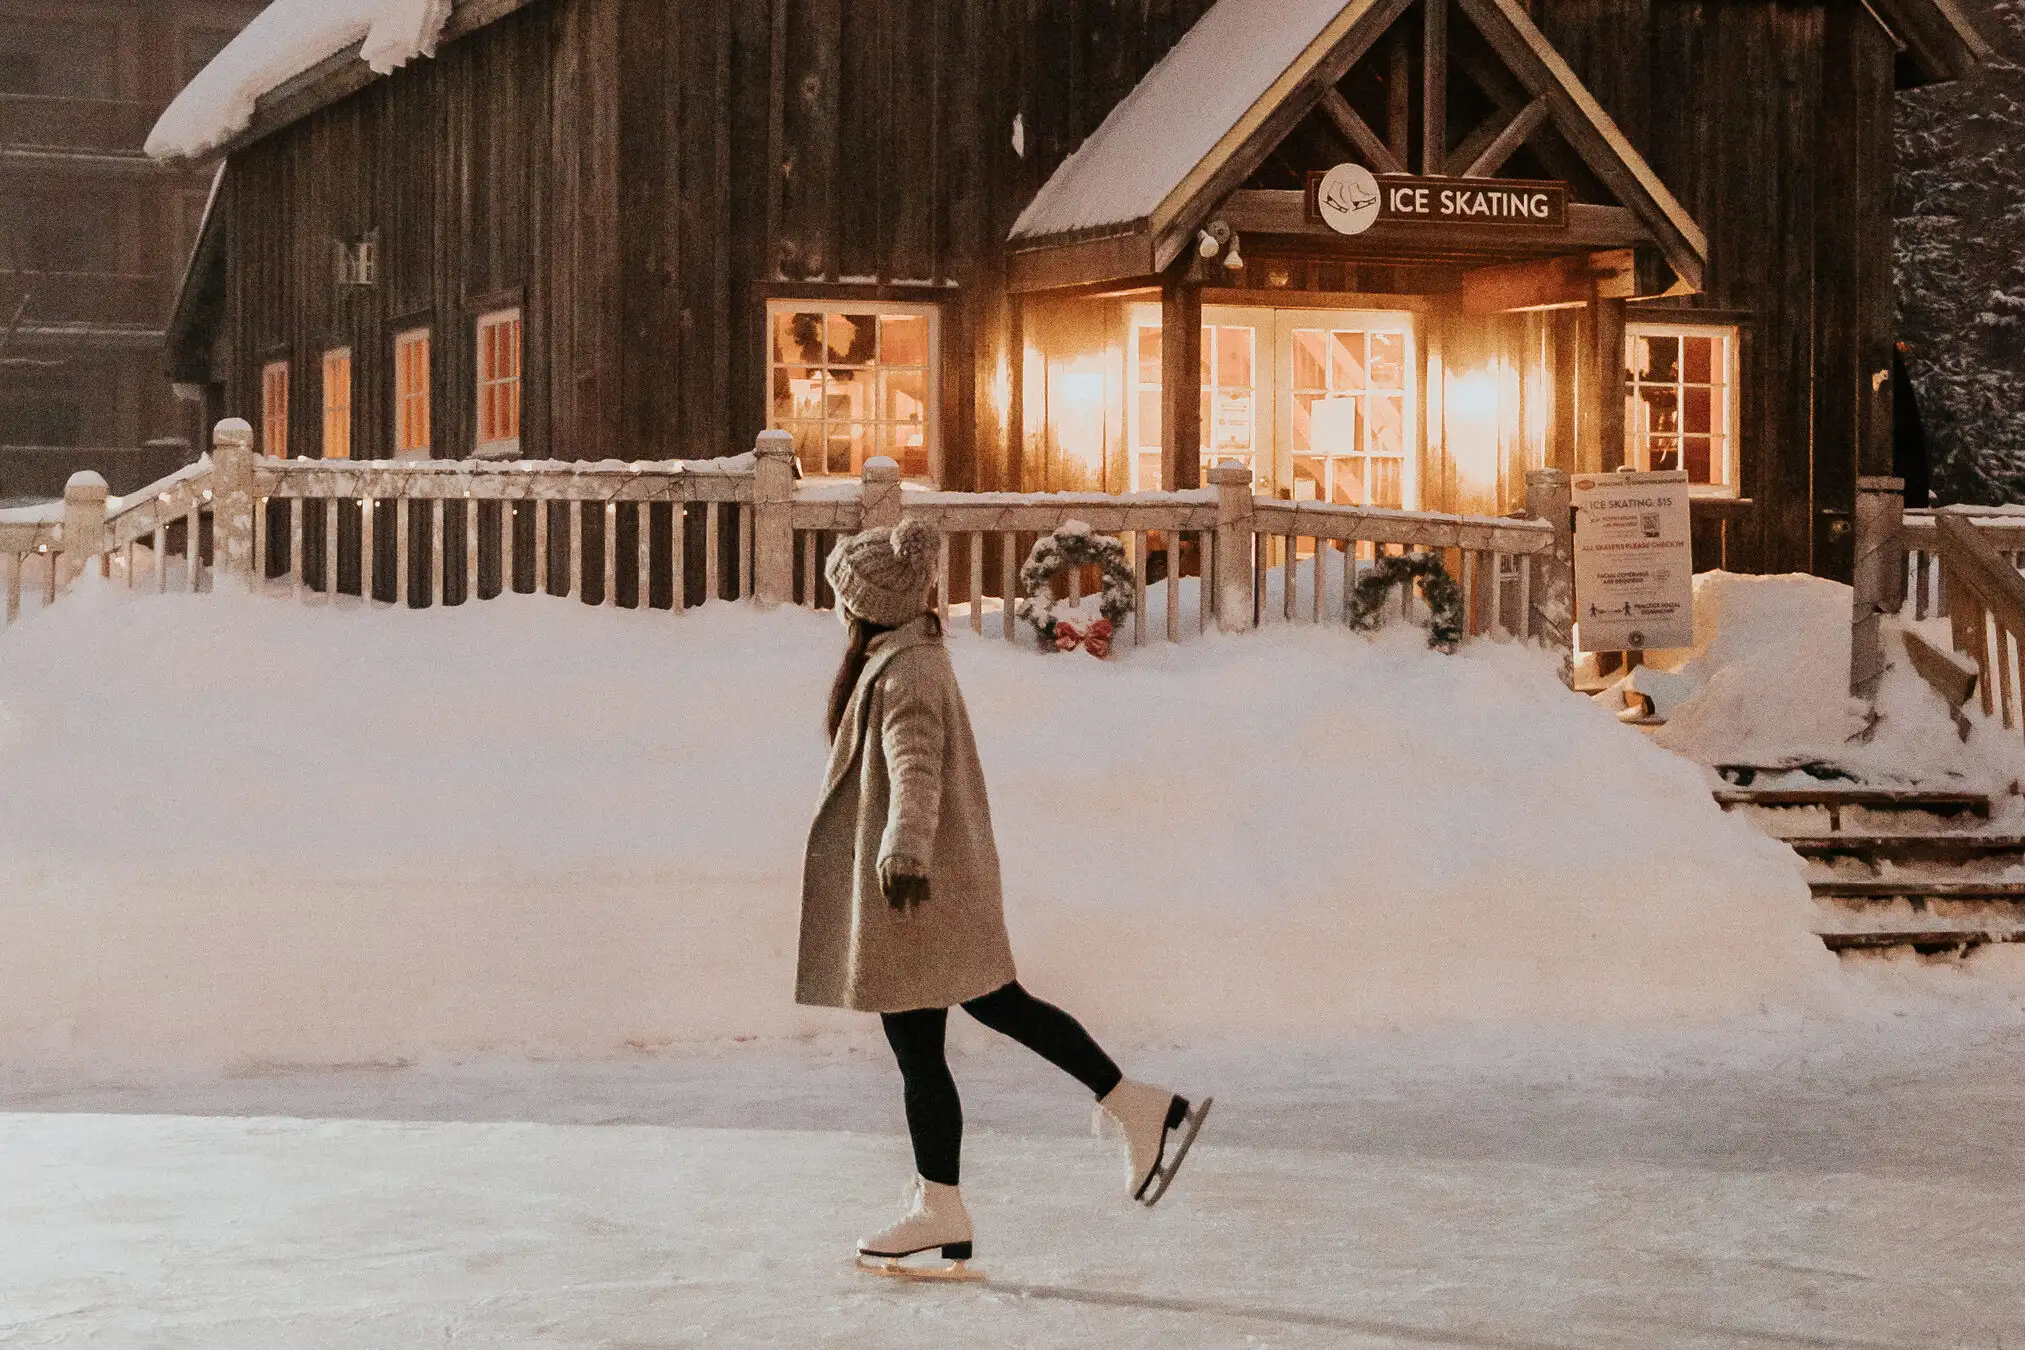 Woman skating alone at the ice skating rink at Stratton in Vermont